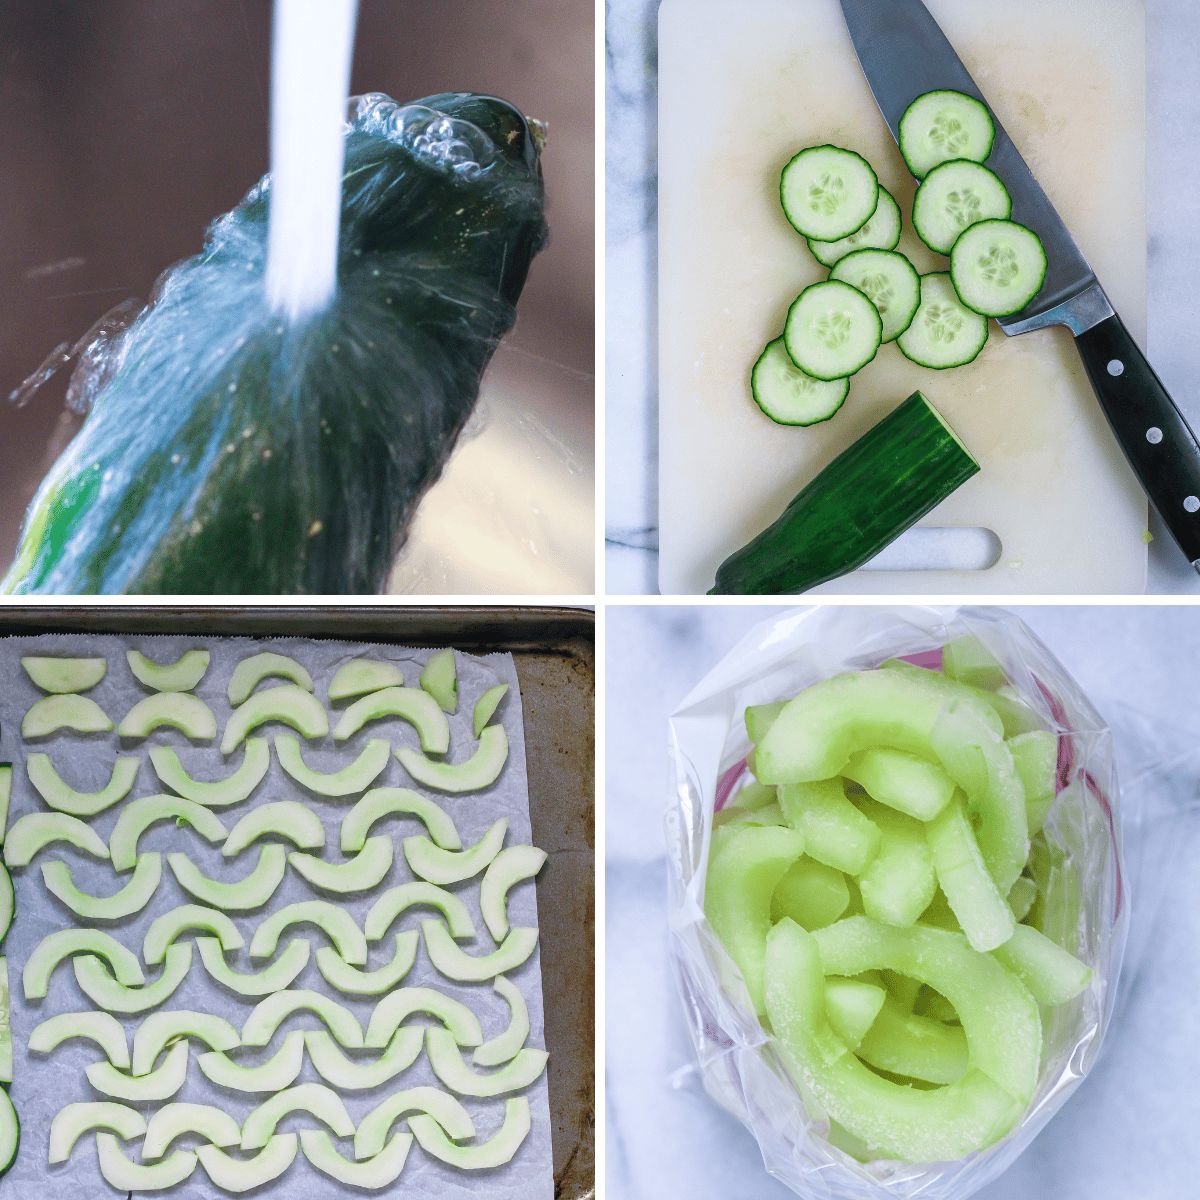 Step-by-Step Instructions to Make Frozen Cucumber Slices